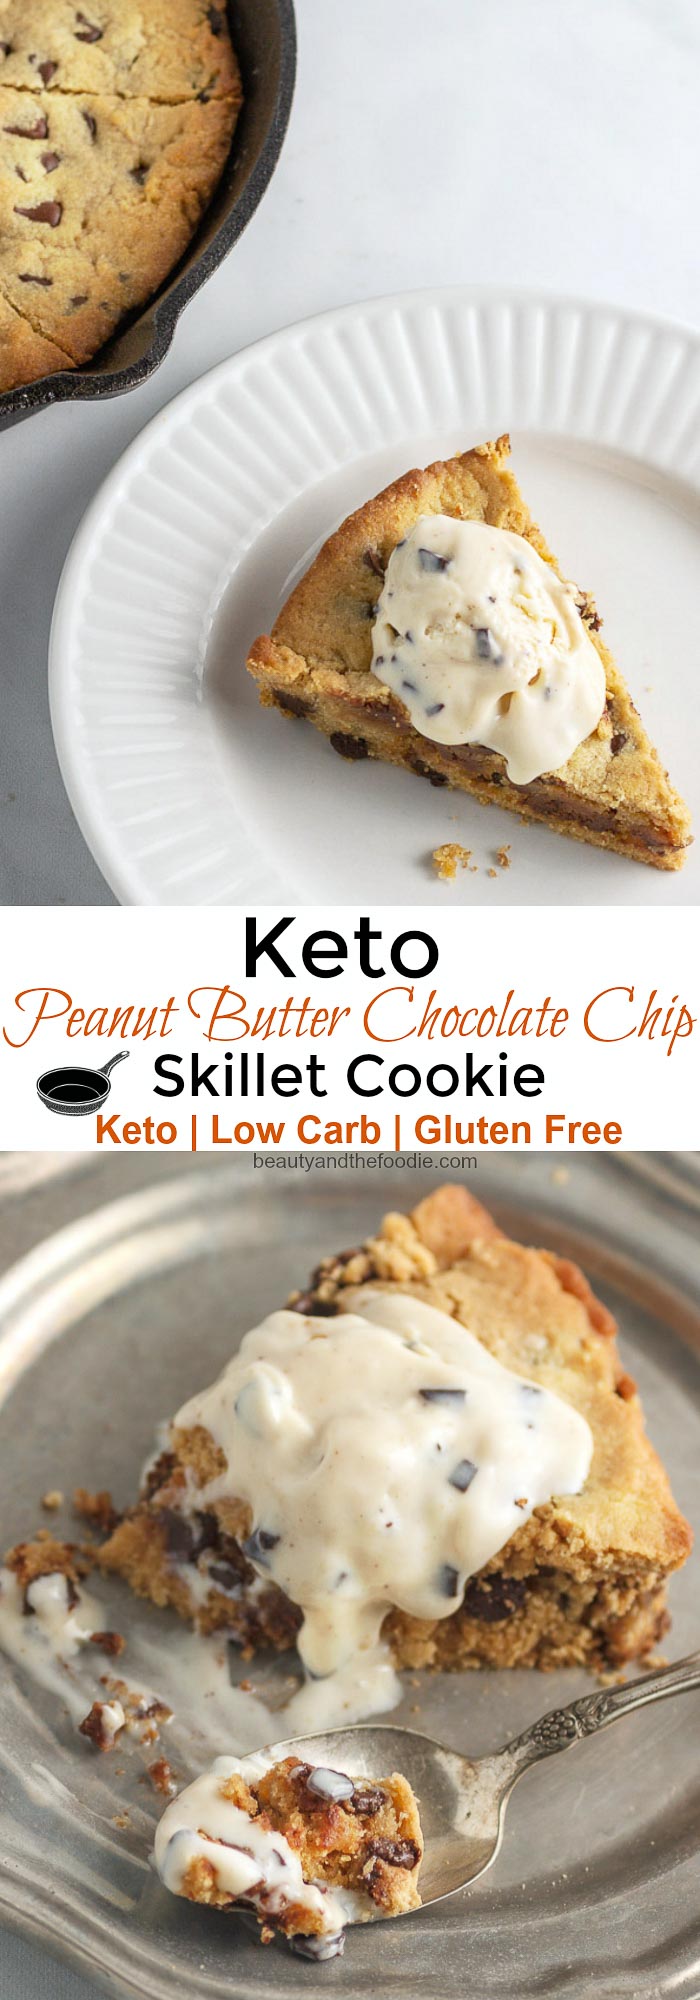 Keto Peanut Butter Chocolate Chip Skillet Cookie- Low Carb and Gluten Free